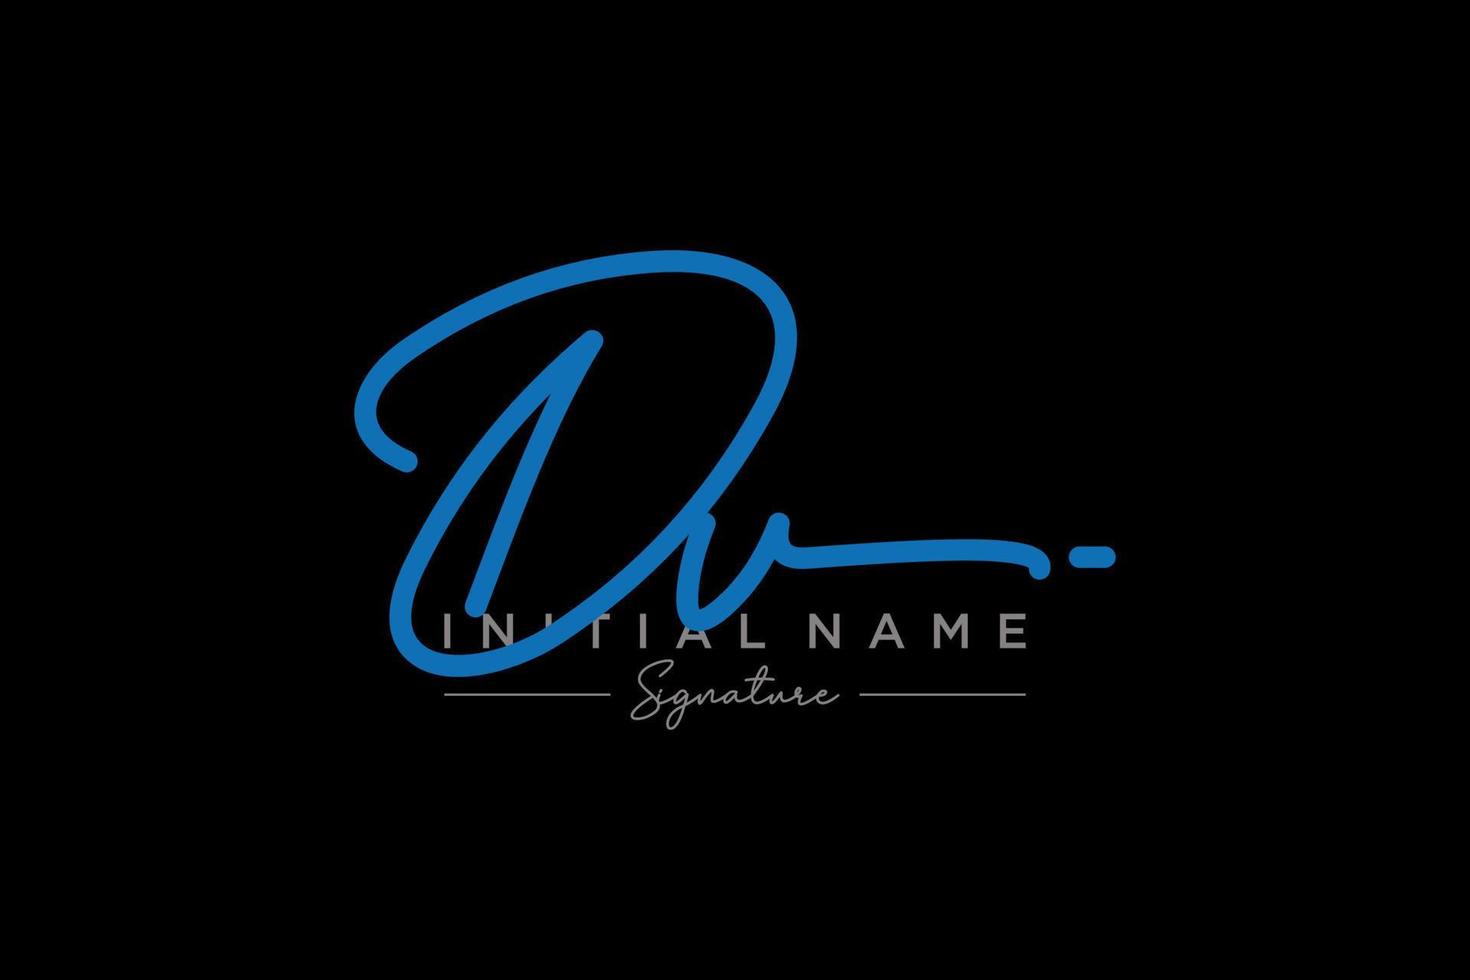 Initial DV signature logo template vector. Hand drawn Calligraphy lettering Vector illustration.